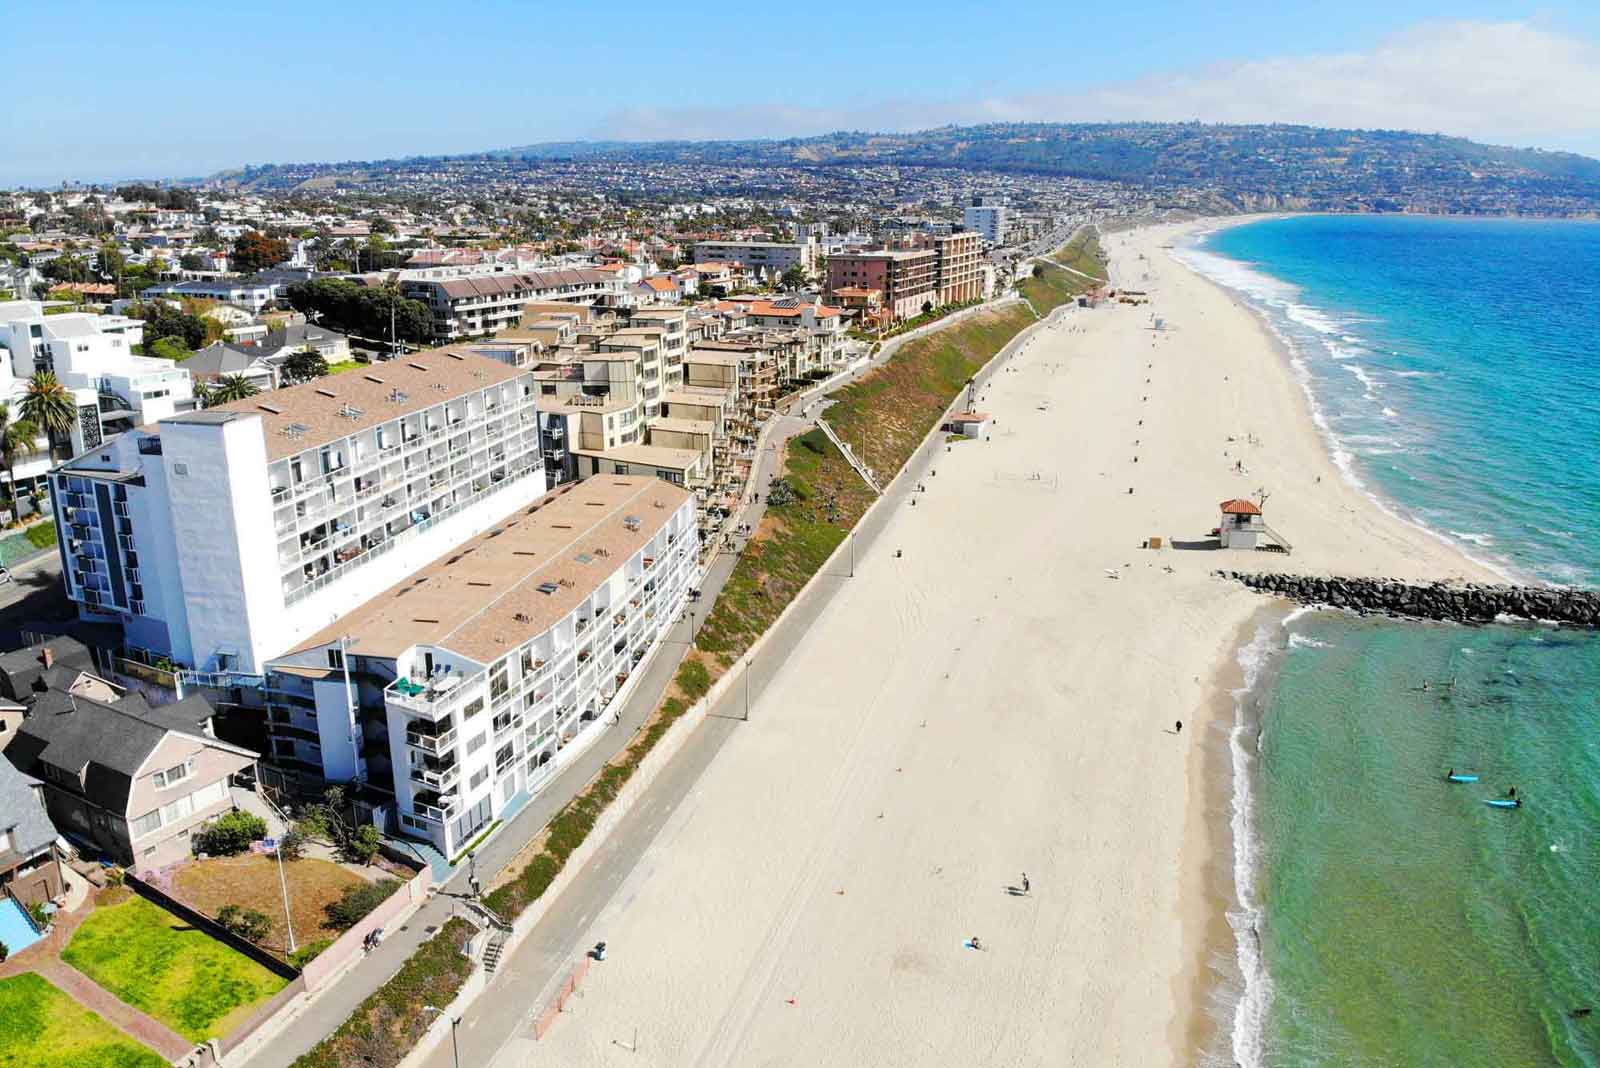 Oceanfront condos for sale in Redondo Beach on the Esplanade background image.